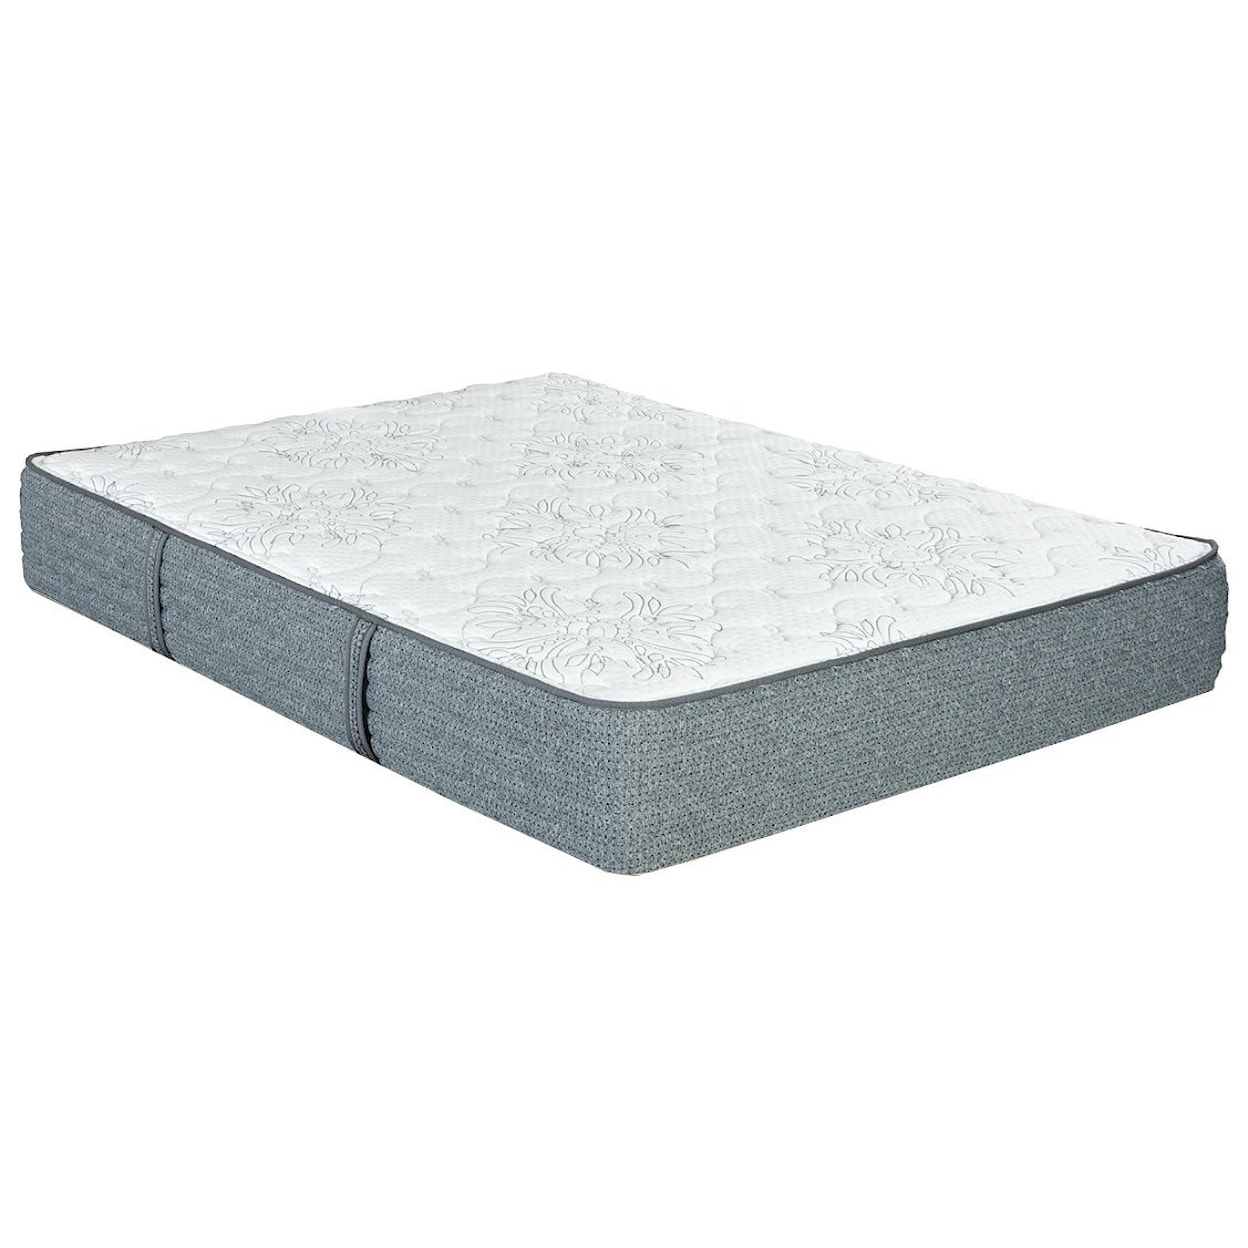 King Koil Laura Ashley Elise X Firm Twin 11" Extra Firm Mattress